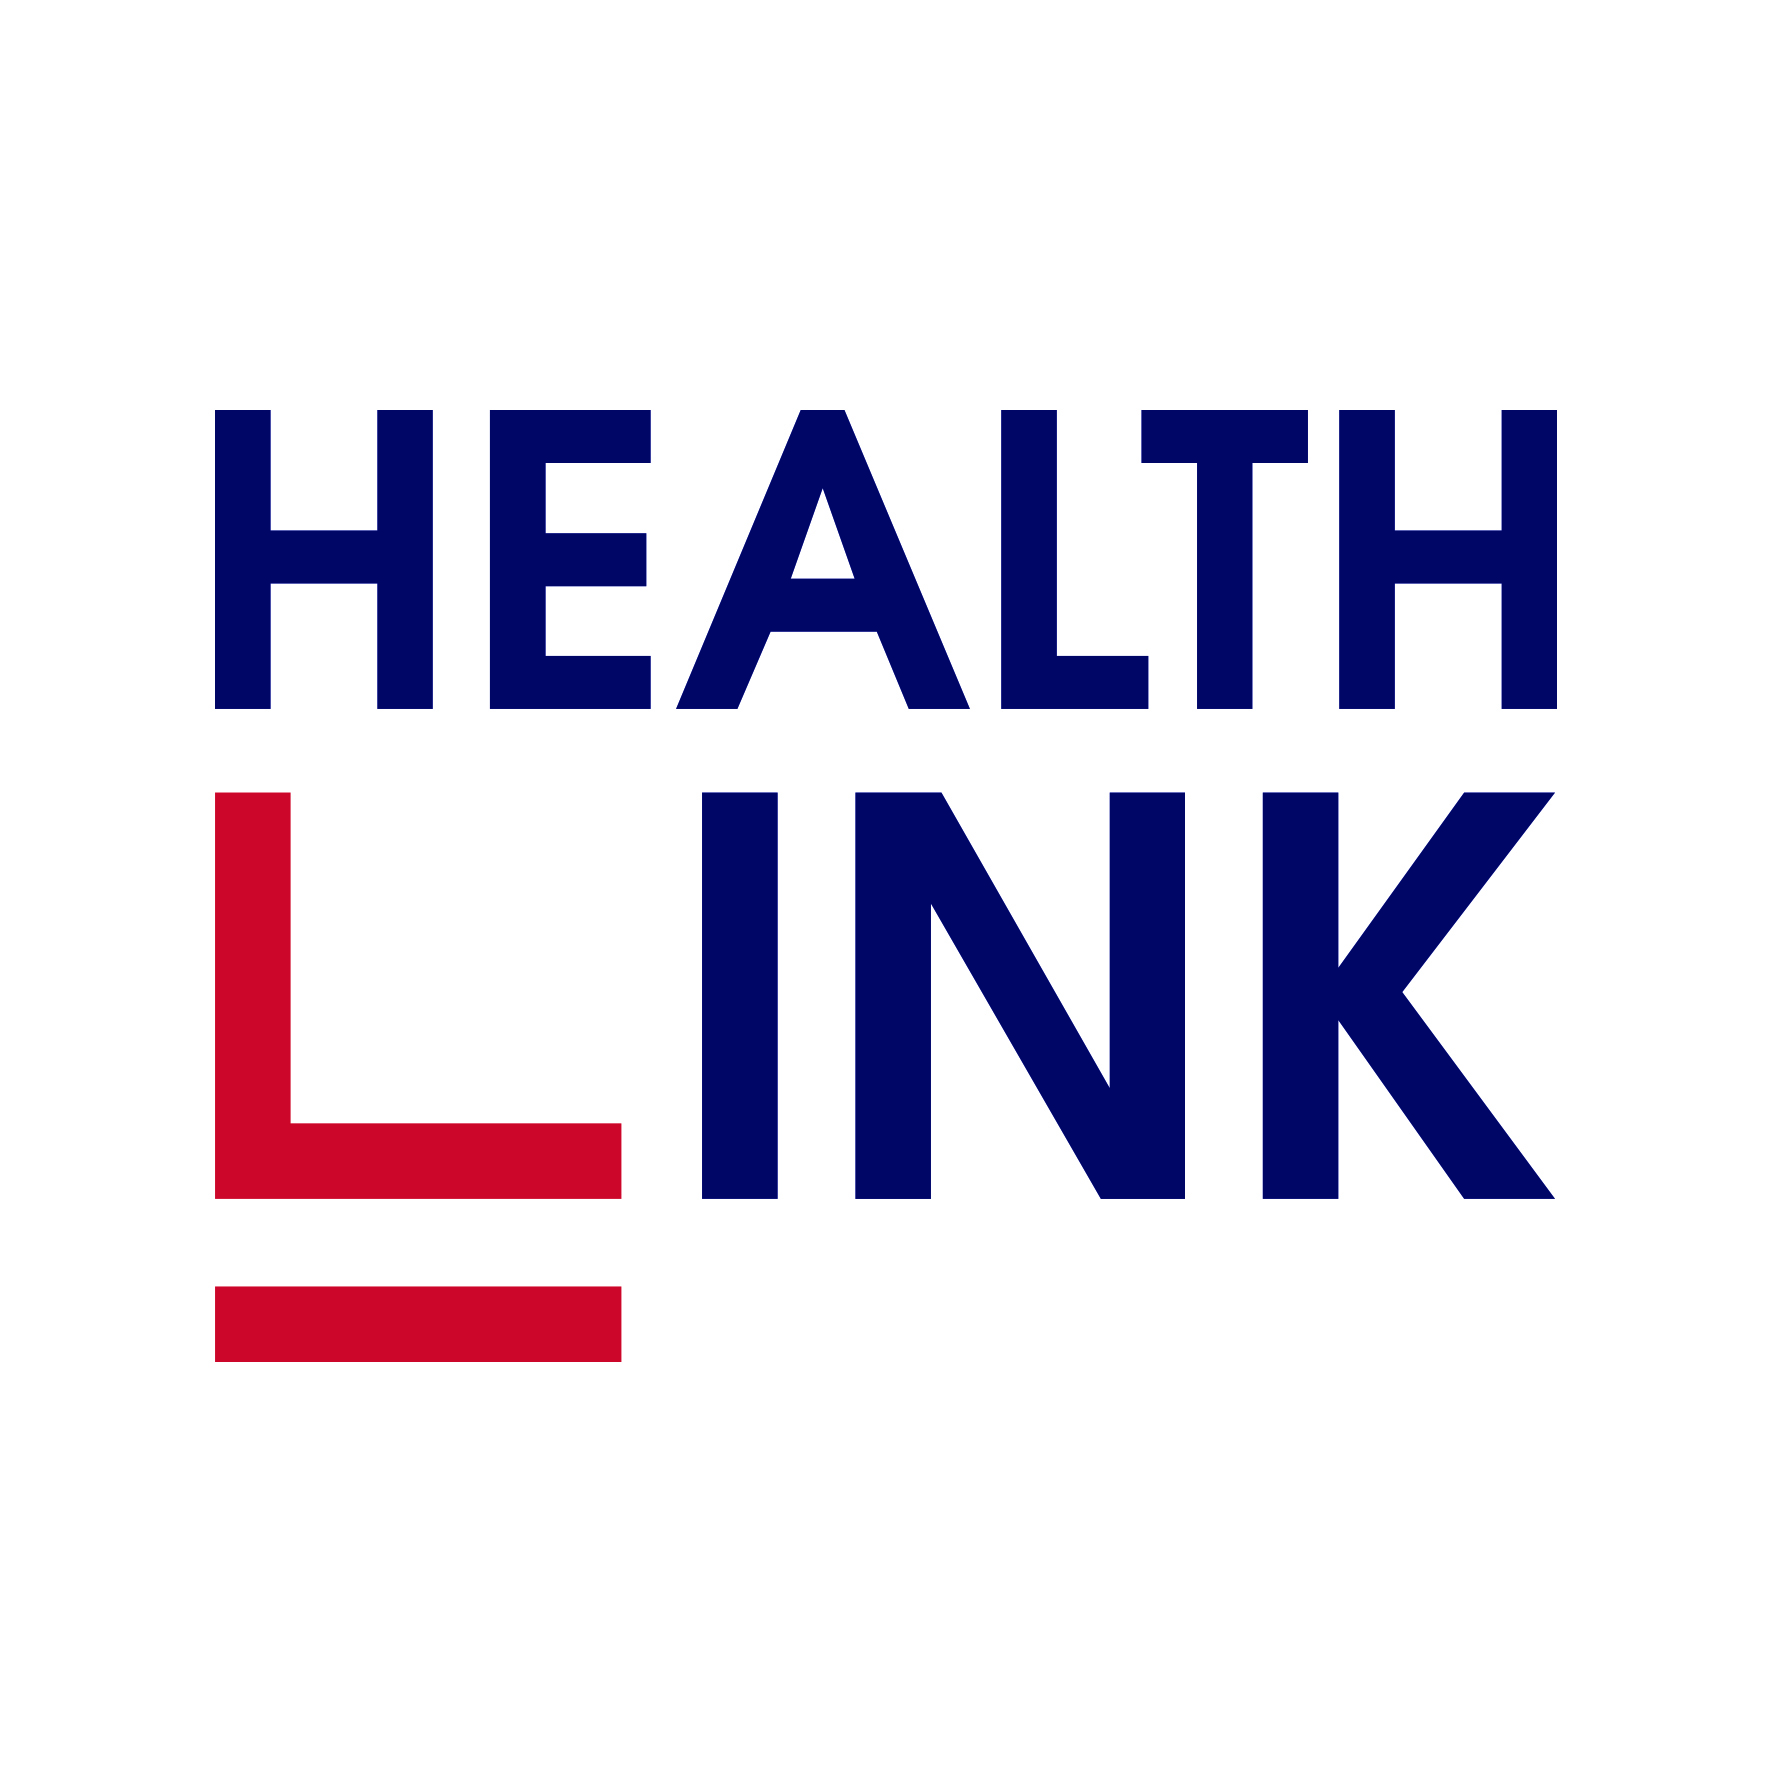 Ukraine launched a large-scale project on HIV / AIDS – HealthLink